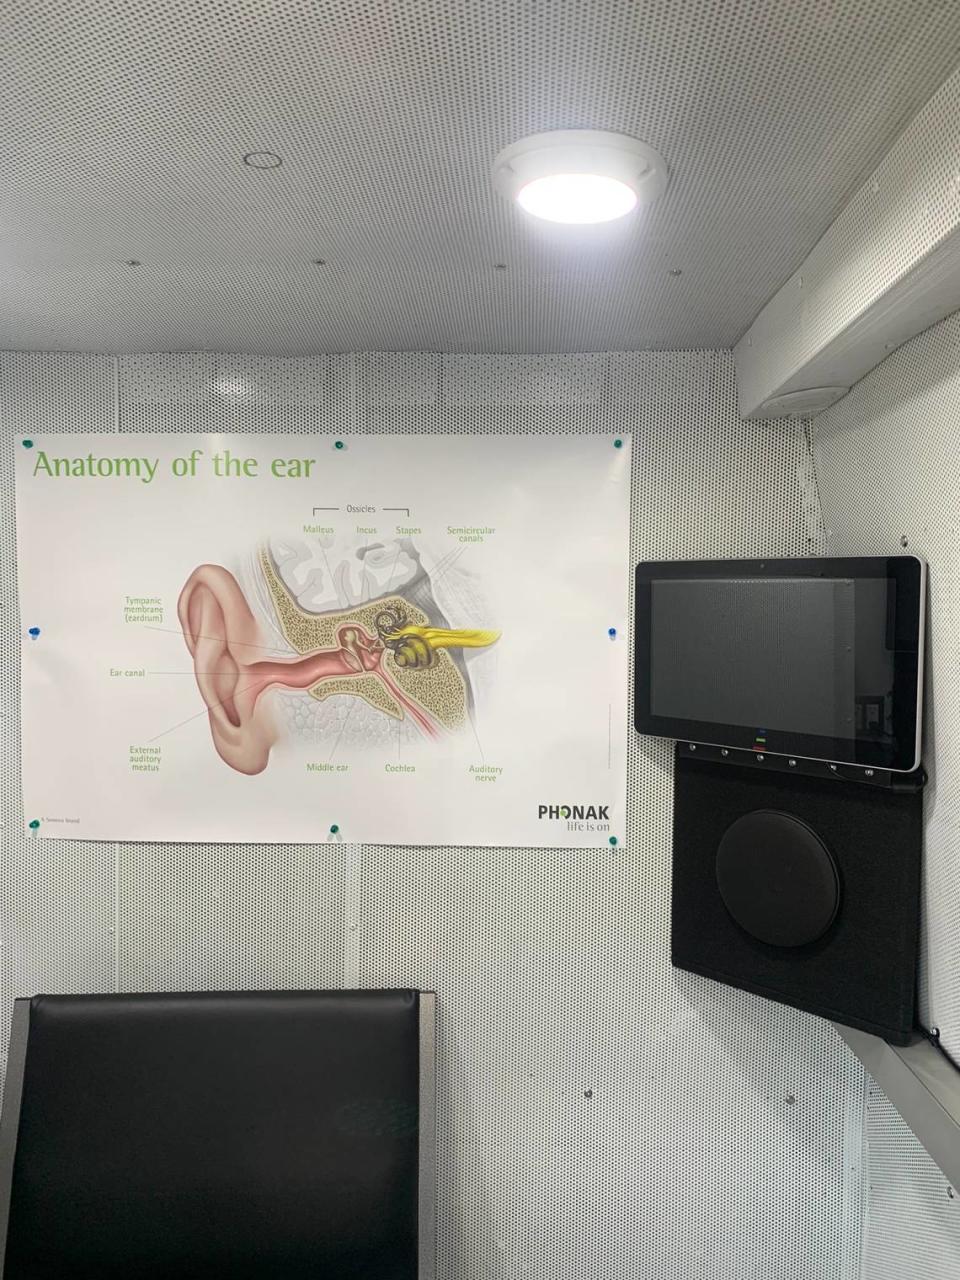 The mobile audiology lab includes a soundproof room for audiometry, where the extent of a youth’s hearing loss is measured.